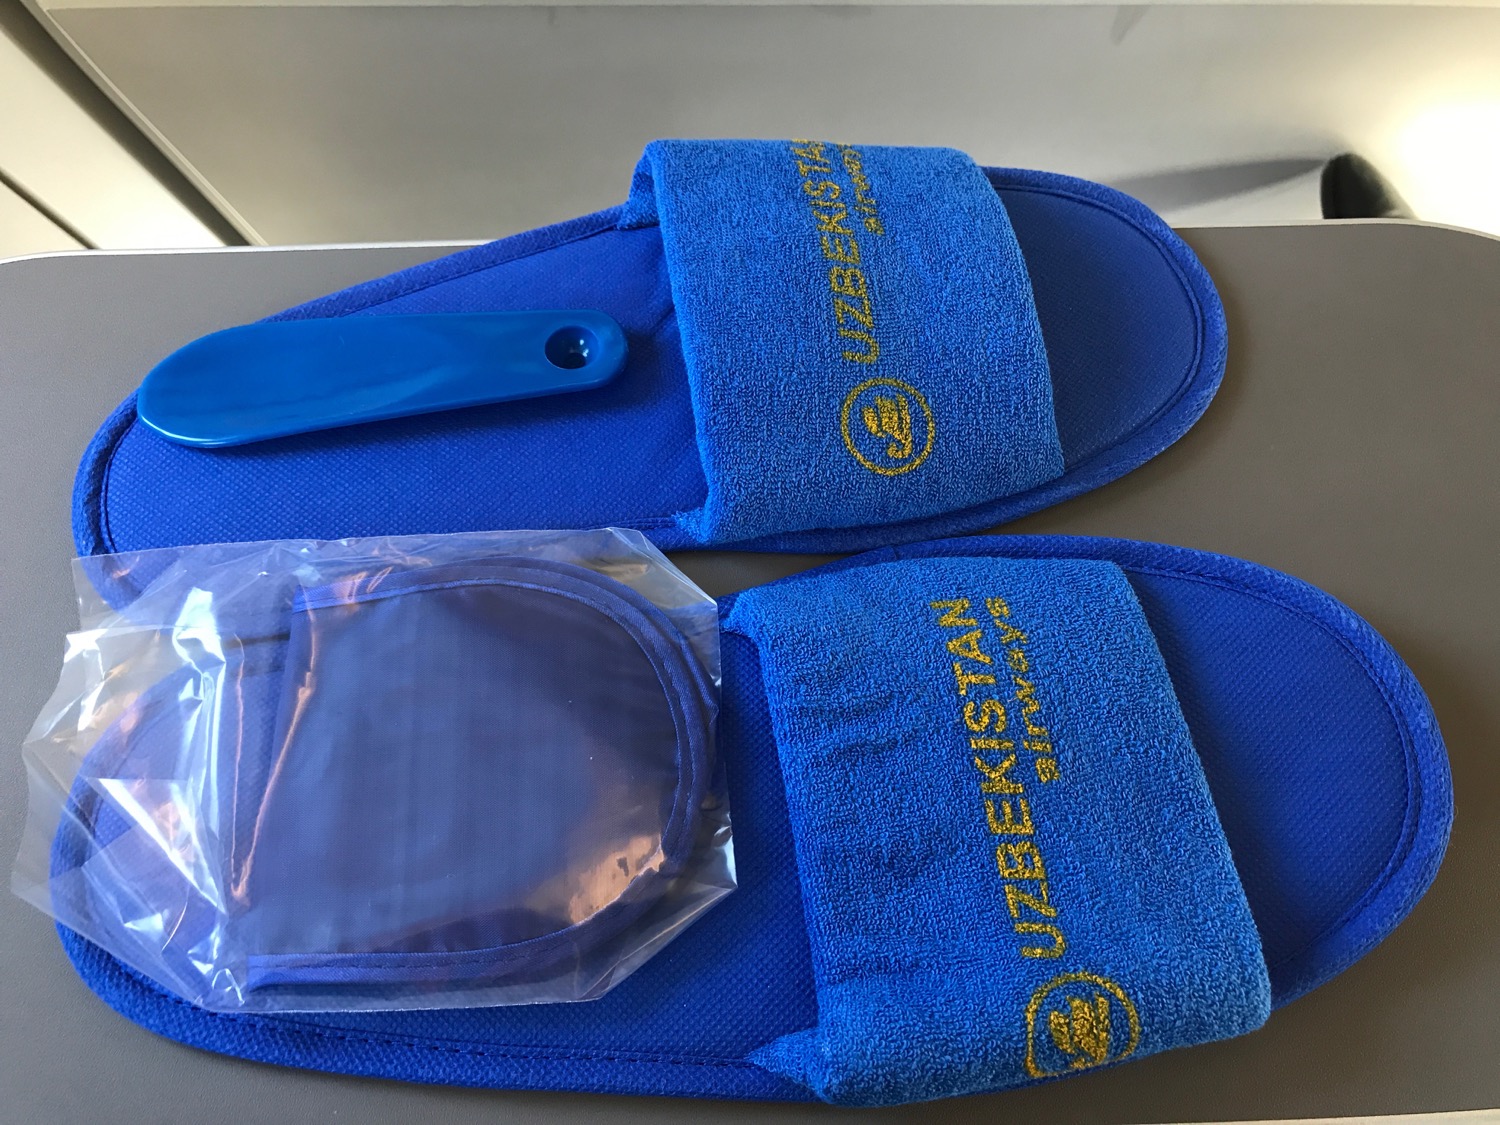 a pair of blue slippers with a blue handle